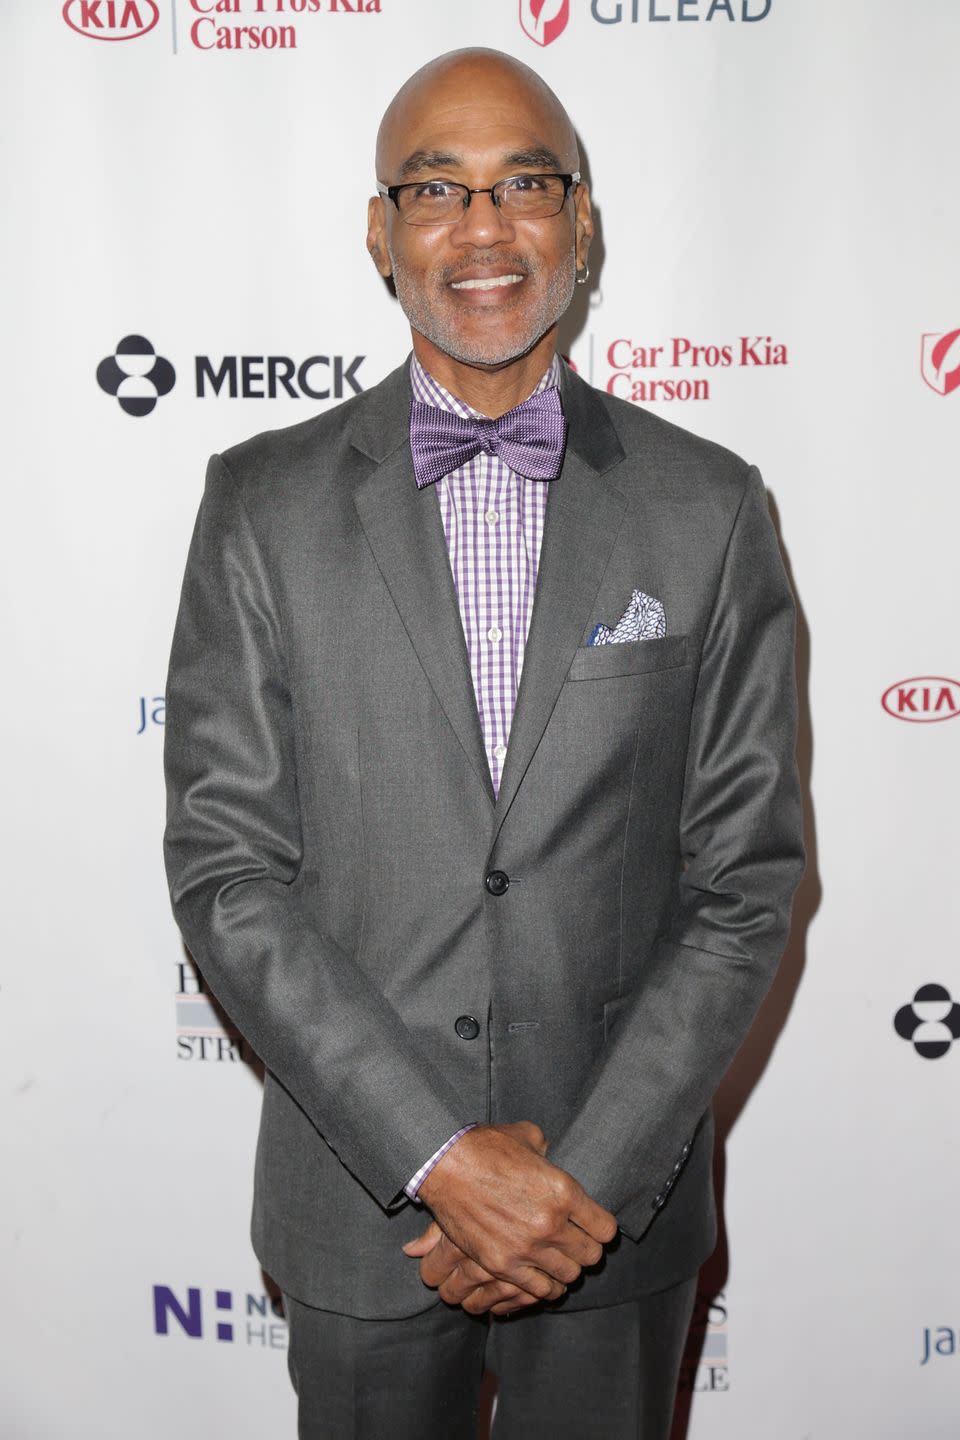 phil wilson smiles at the camera while standing in front of a white background with logos, he clasps his hands in front of him, he wears a gray suit with a purple and white checkered shirt and purple bowtie